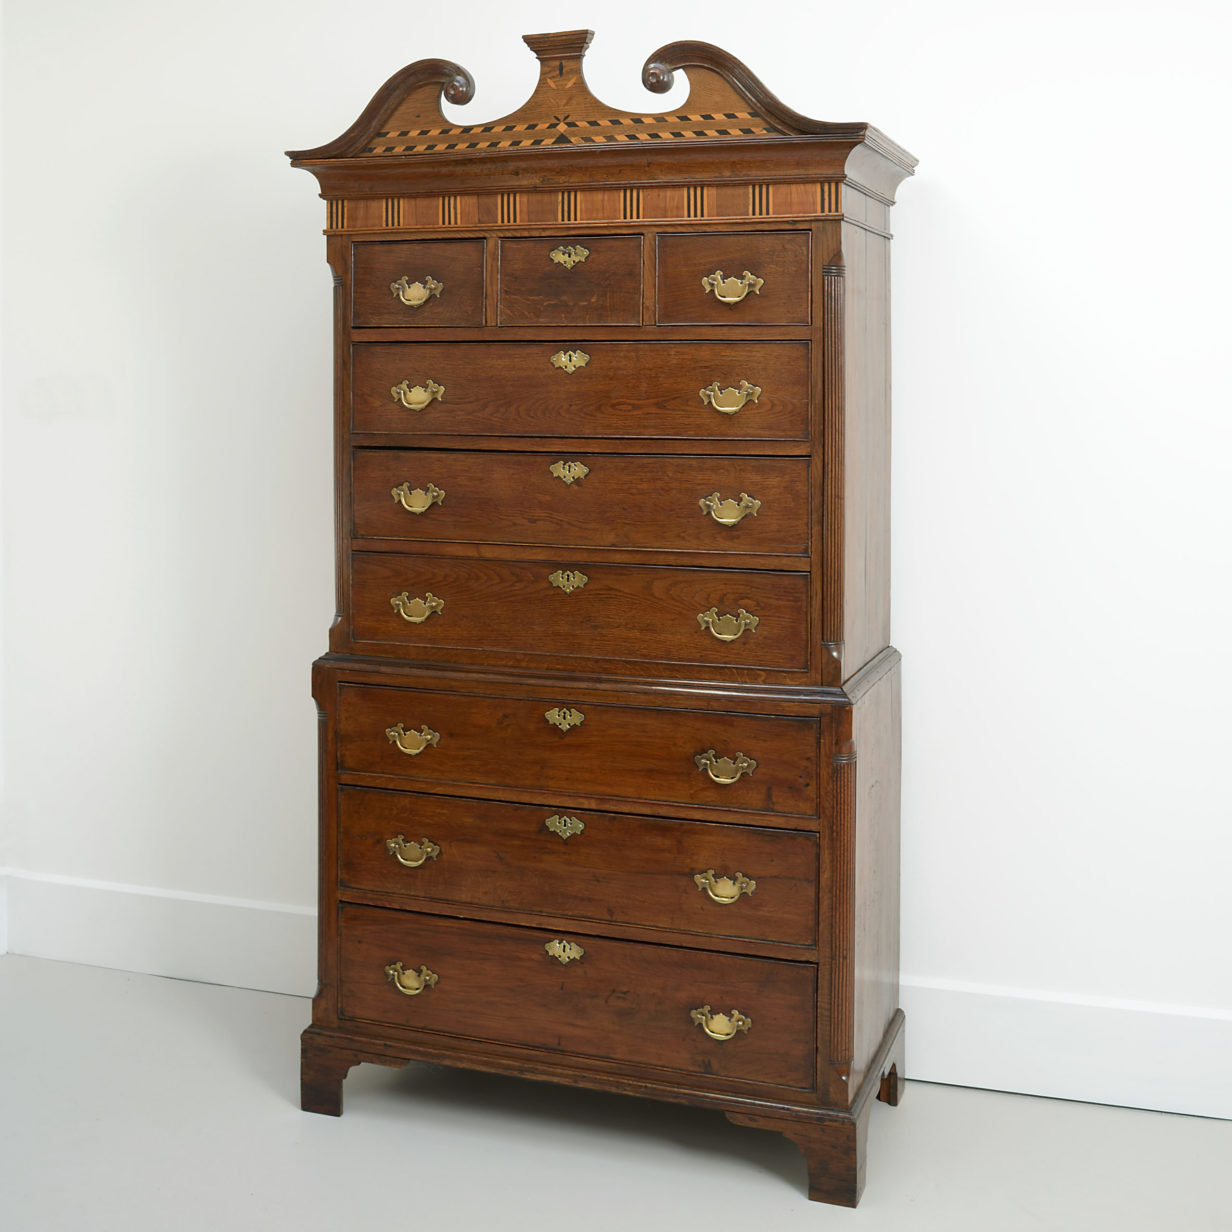 Oak chest on stand